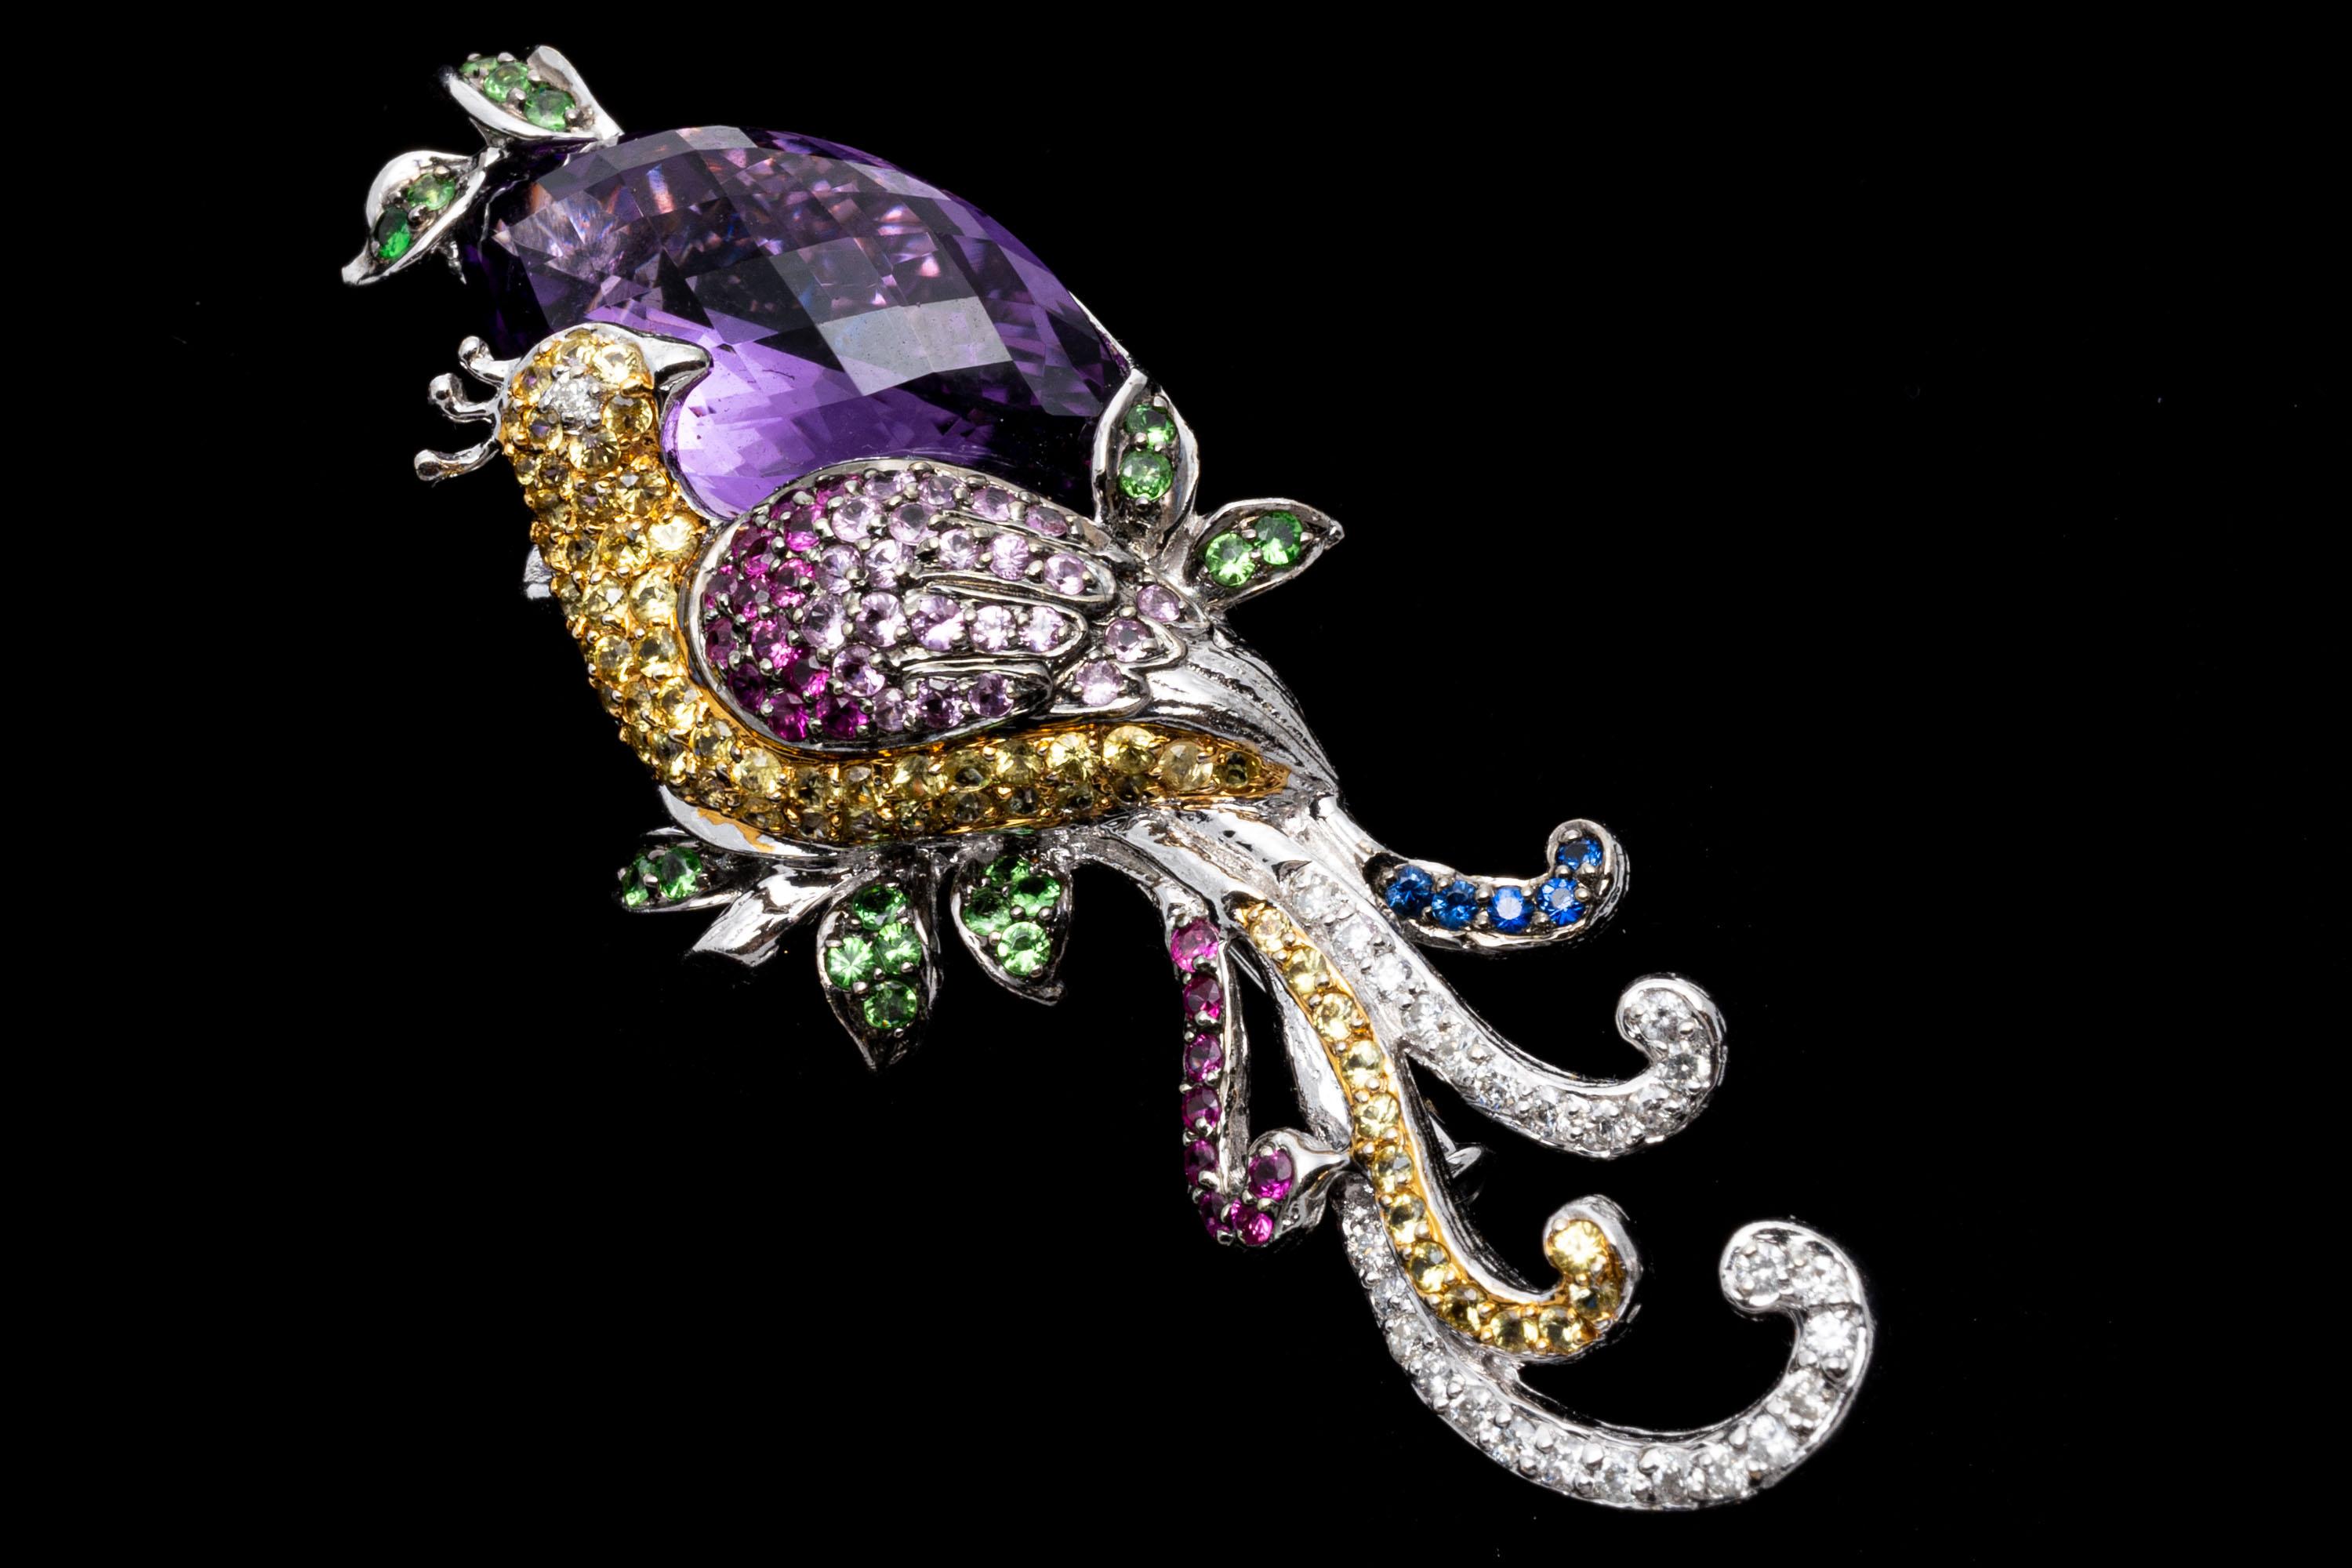 18k white gold brooch. This magnificent brooch is a bird of paradise motif, prong set with a chest of round faceted yellow sapphires that lead into the tail (approximately 1.98 TCW), wings of ombre dark to light pink sapphires that also lead into